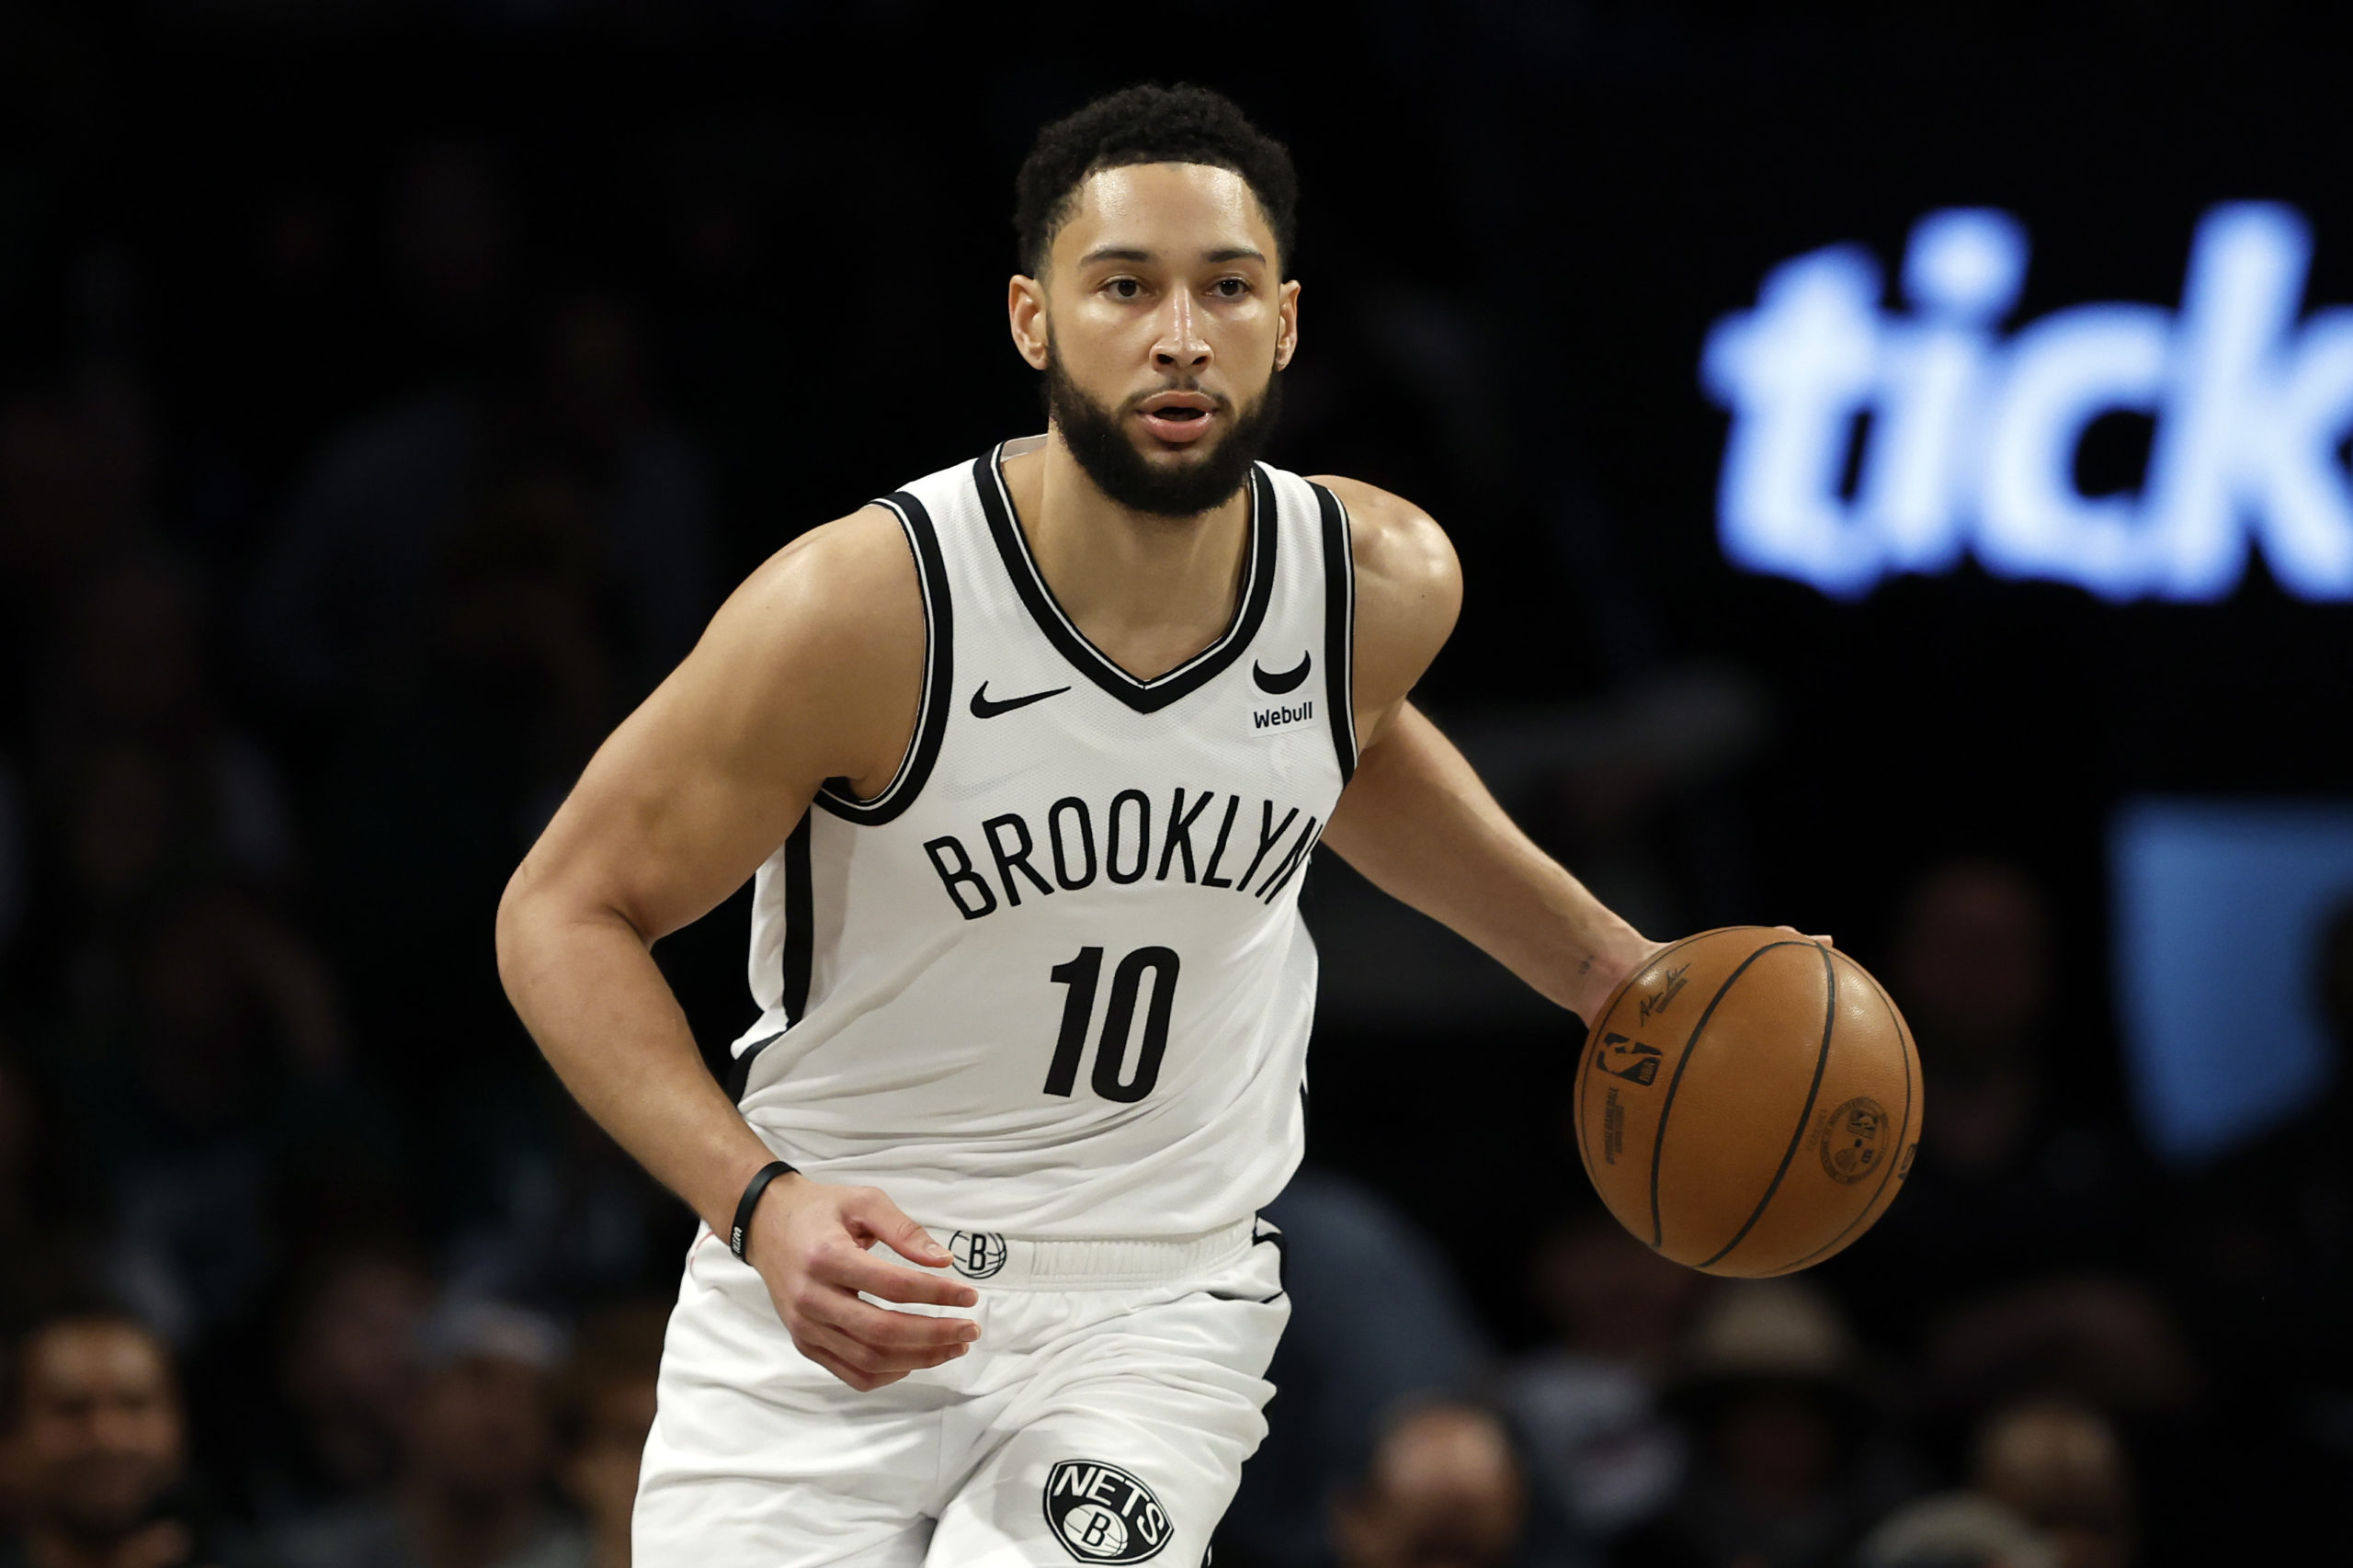 NEW YORK, NEW YORK - FEBRUARY 13: Ben Simmons #10 of the Brooklyn Nets dribbles during the second half against the Boston Celtics at Barclays Center on February 13, 2024 in the Brooklyn borough of New York City. The Celtics won 118-110. Sarah Stier/Getty Images